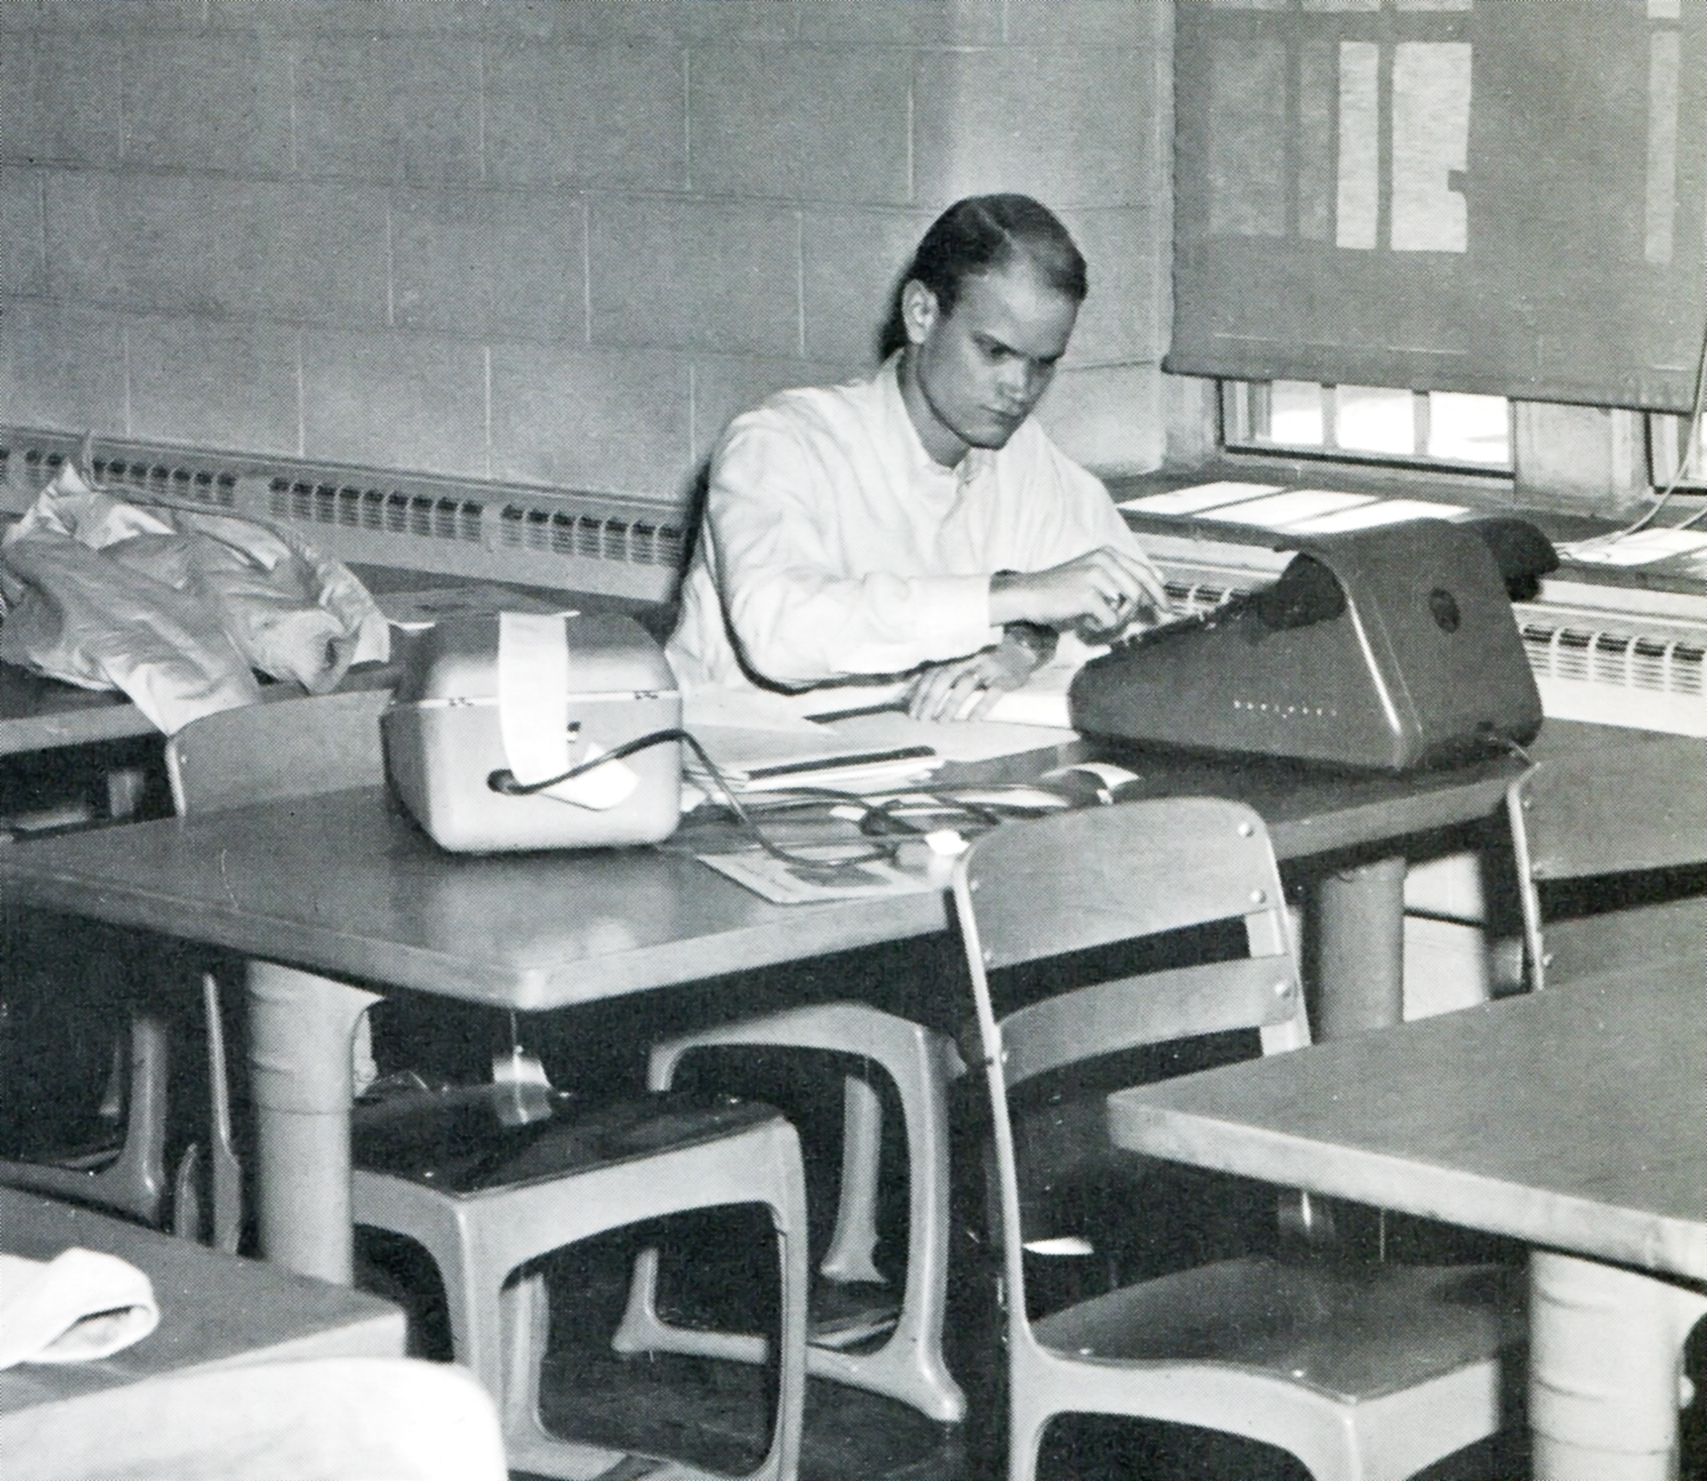 A business student at what was then Virginia Polytechnic Institute works on an assignment.